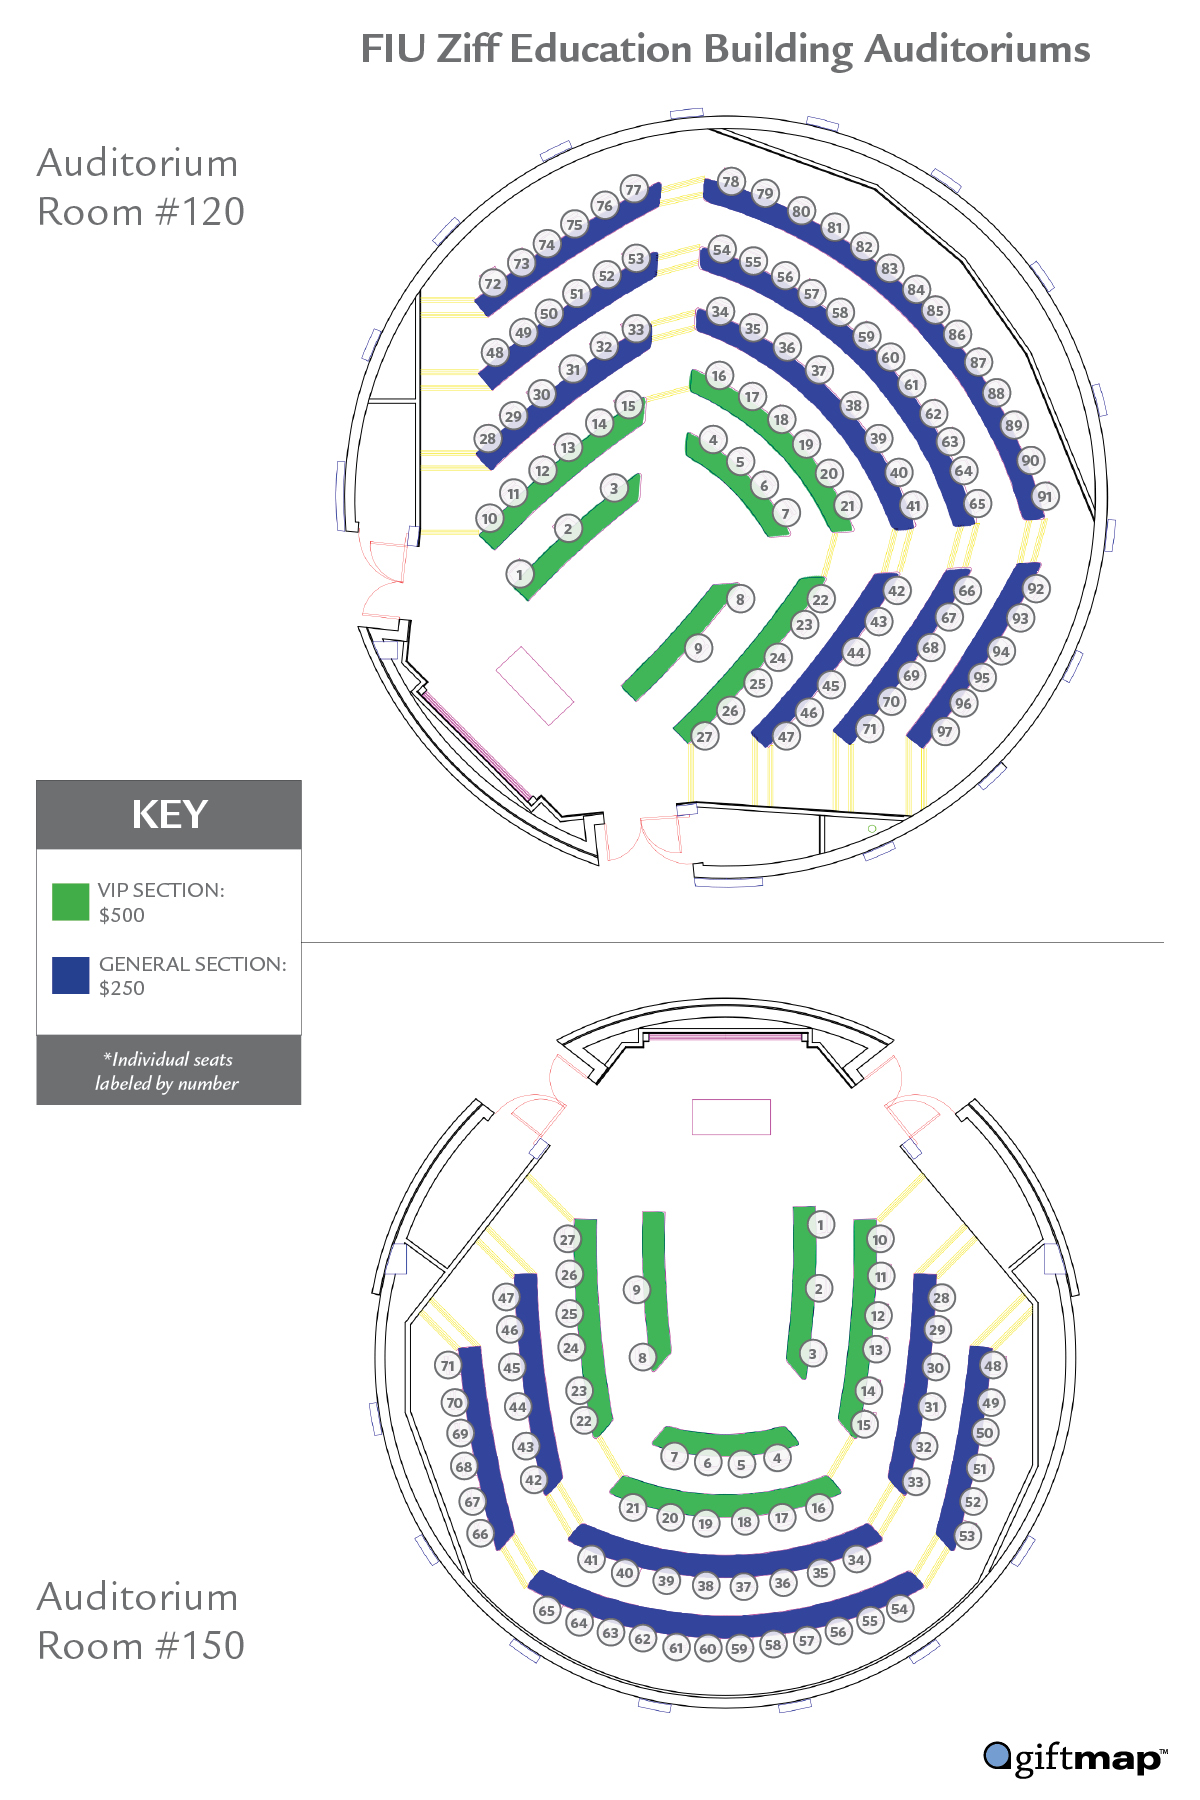 Map of seating choices for Take a Seat campaign